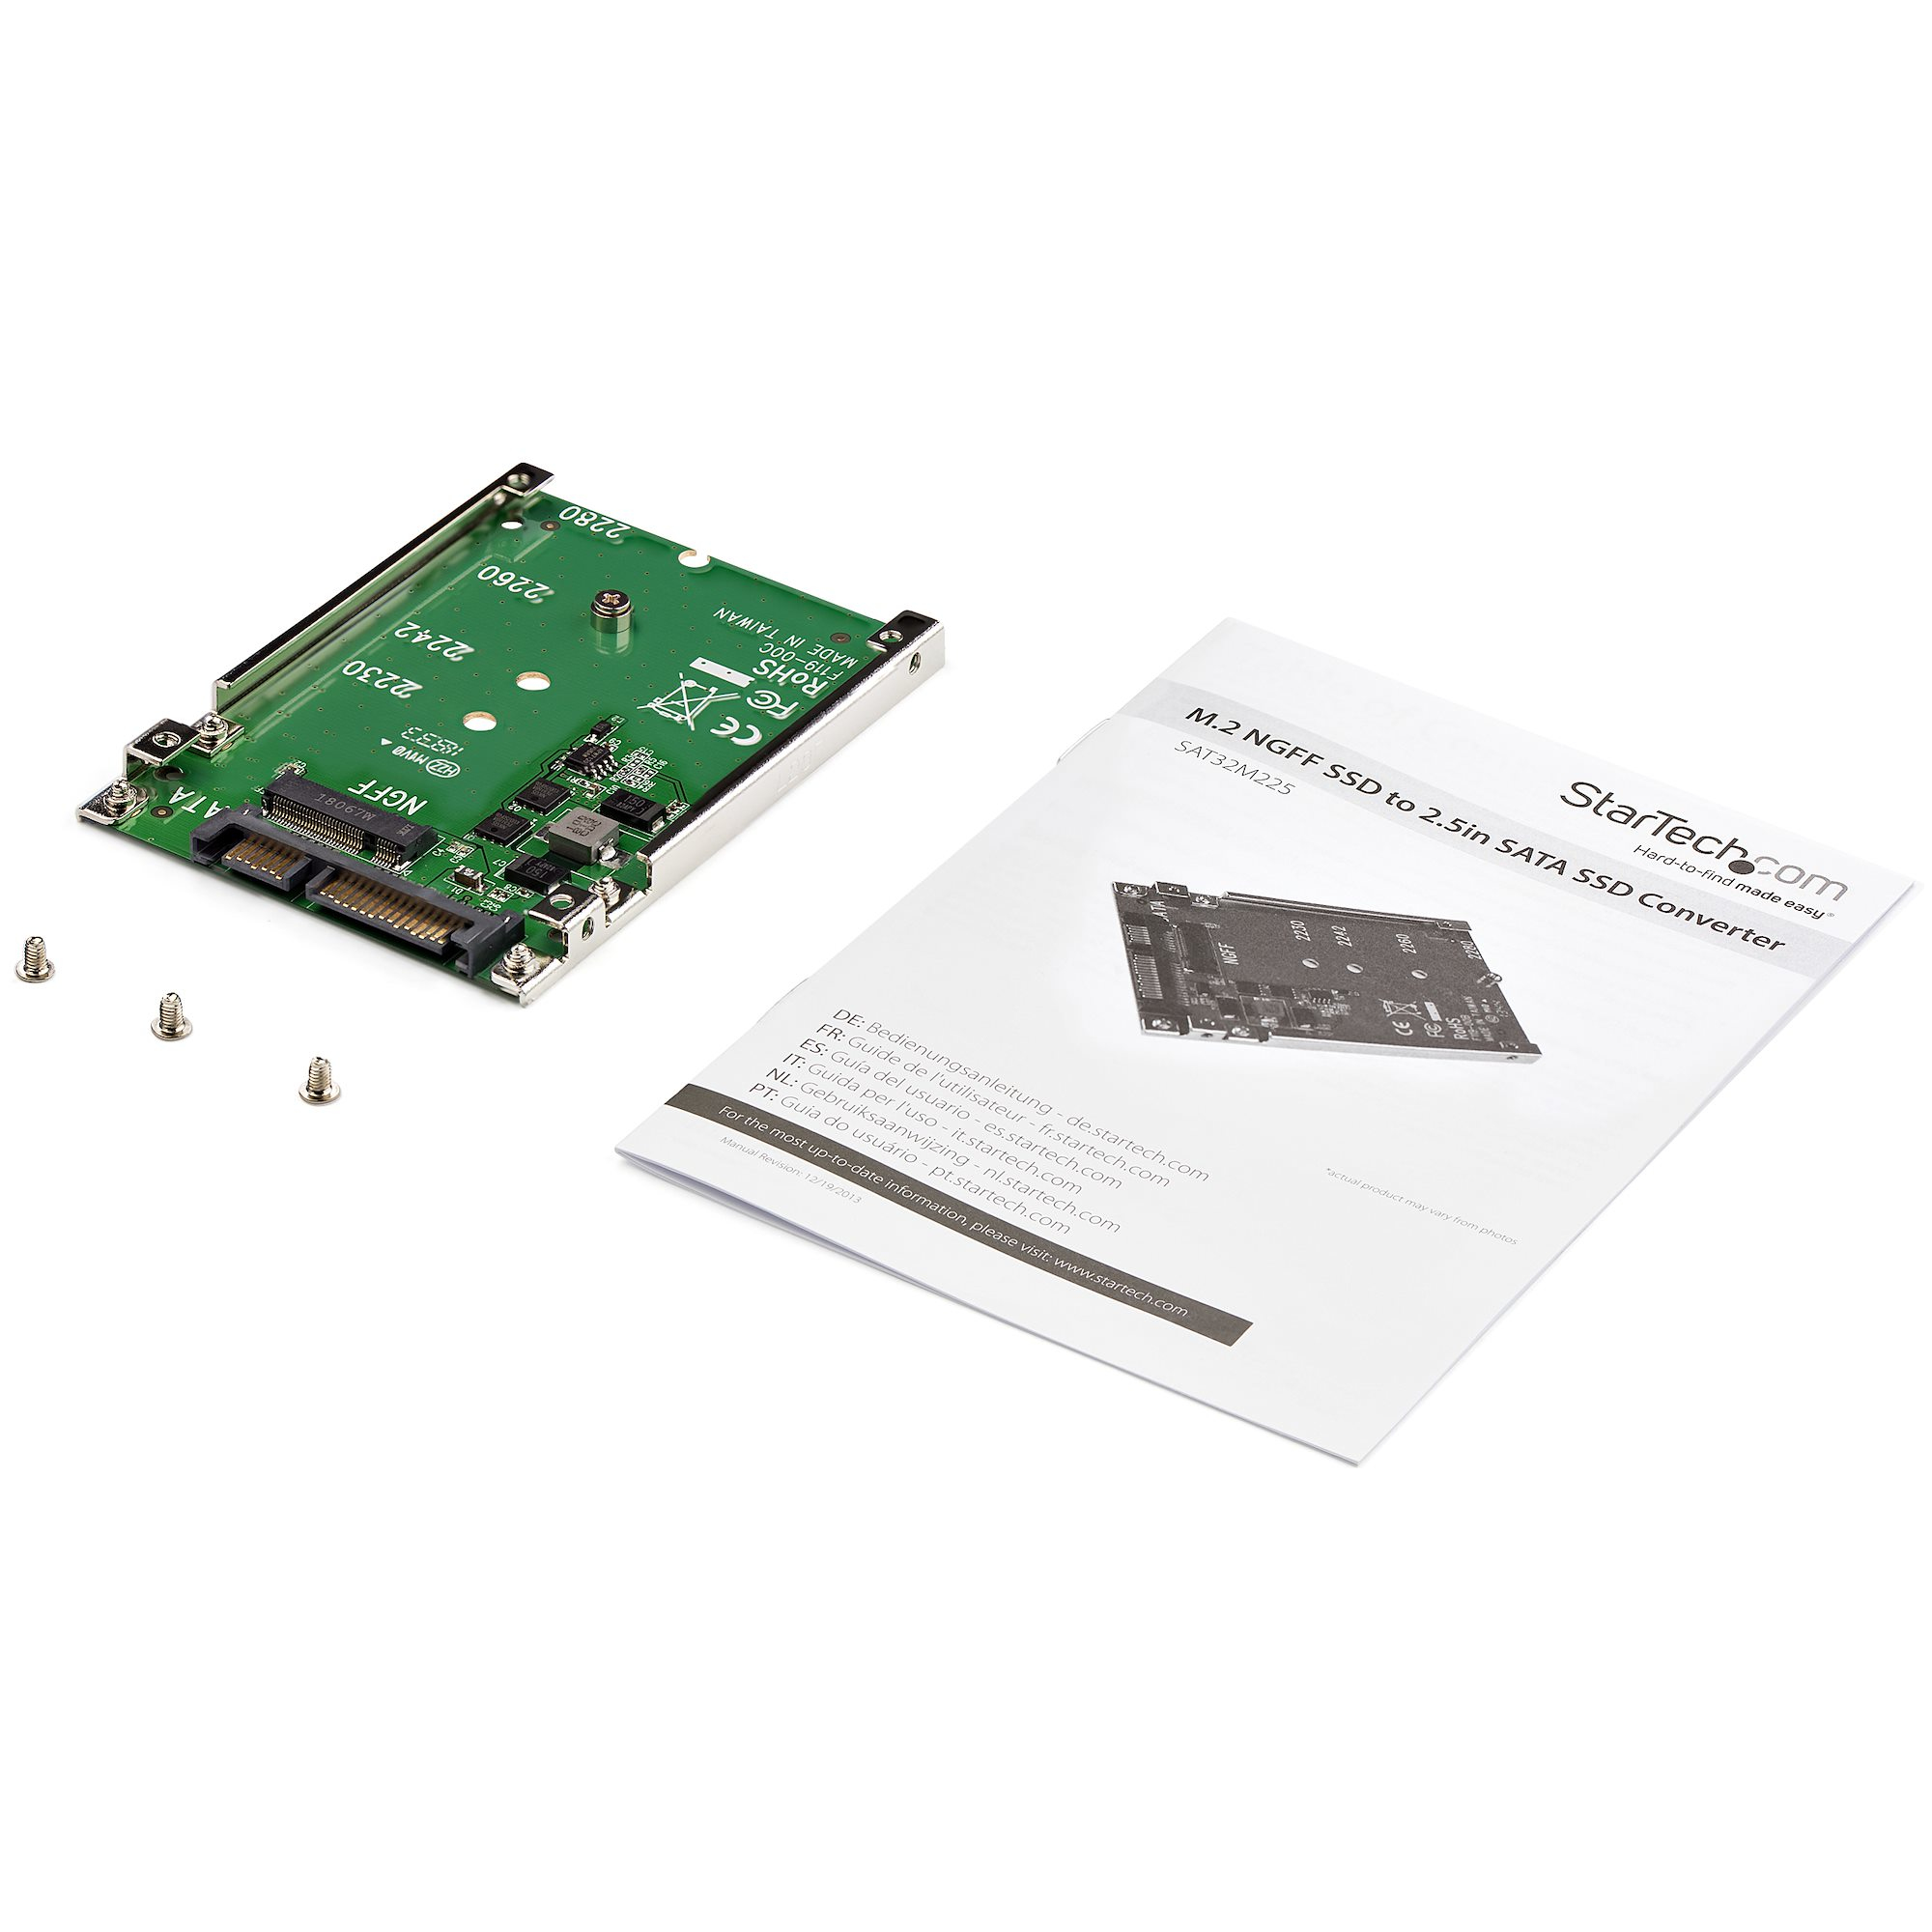 StarTech.com M.2 NGFF SSD to 2.5in SATA Adapter Converter